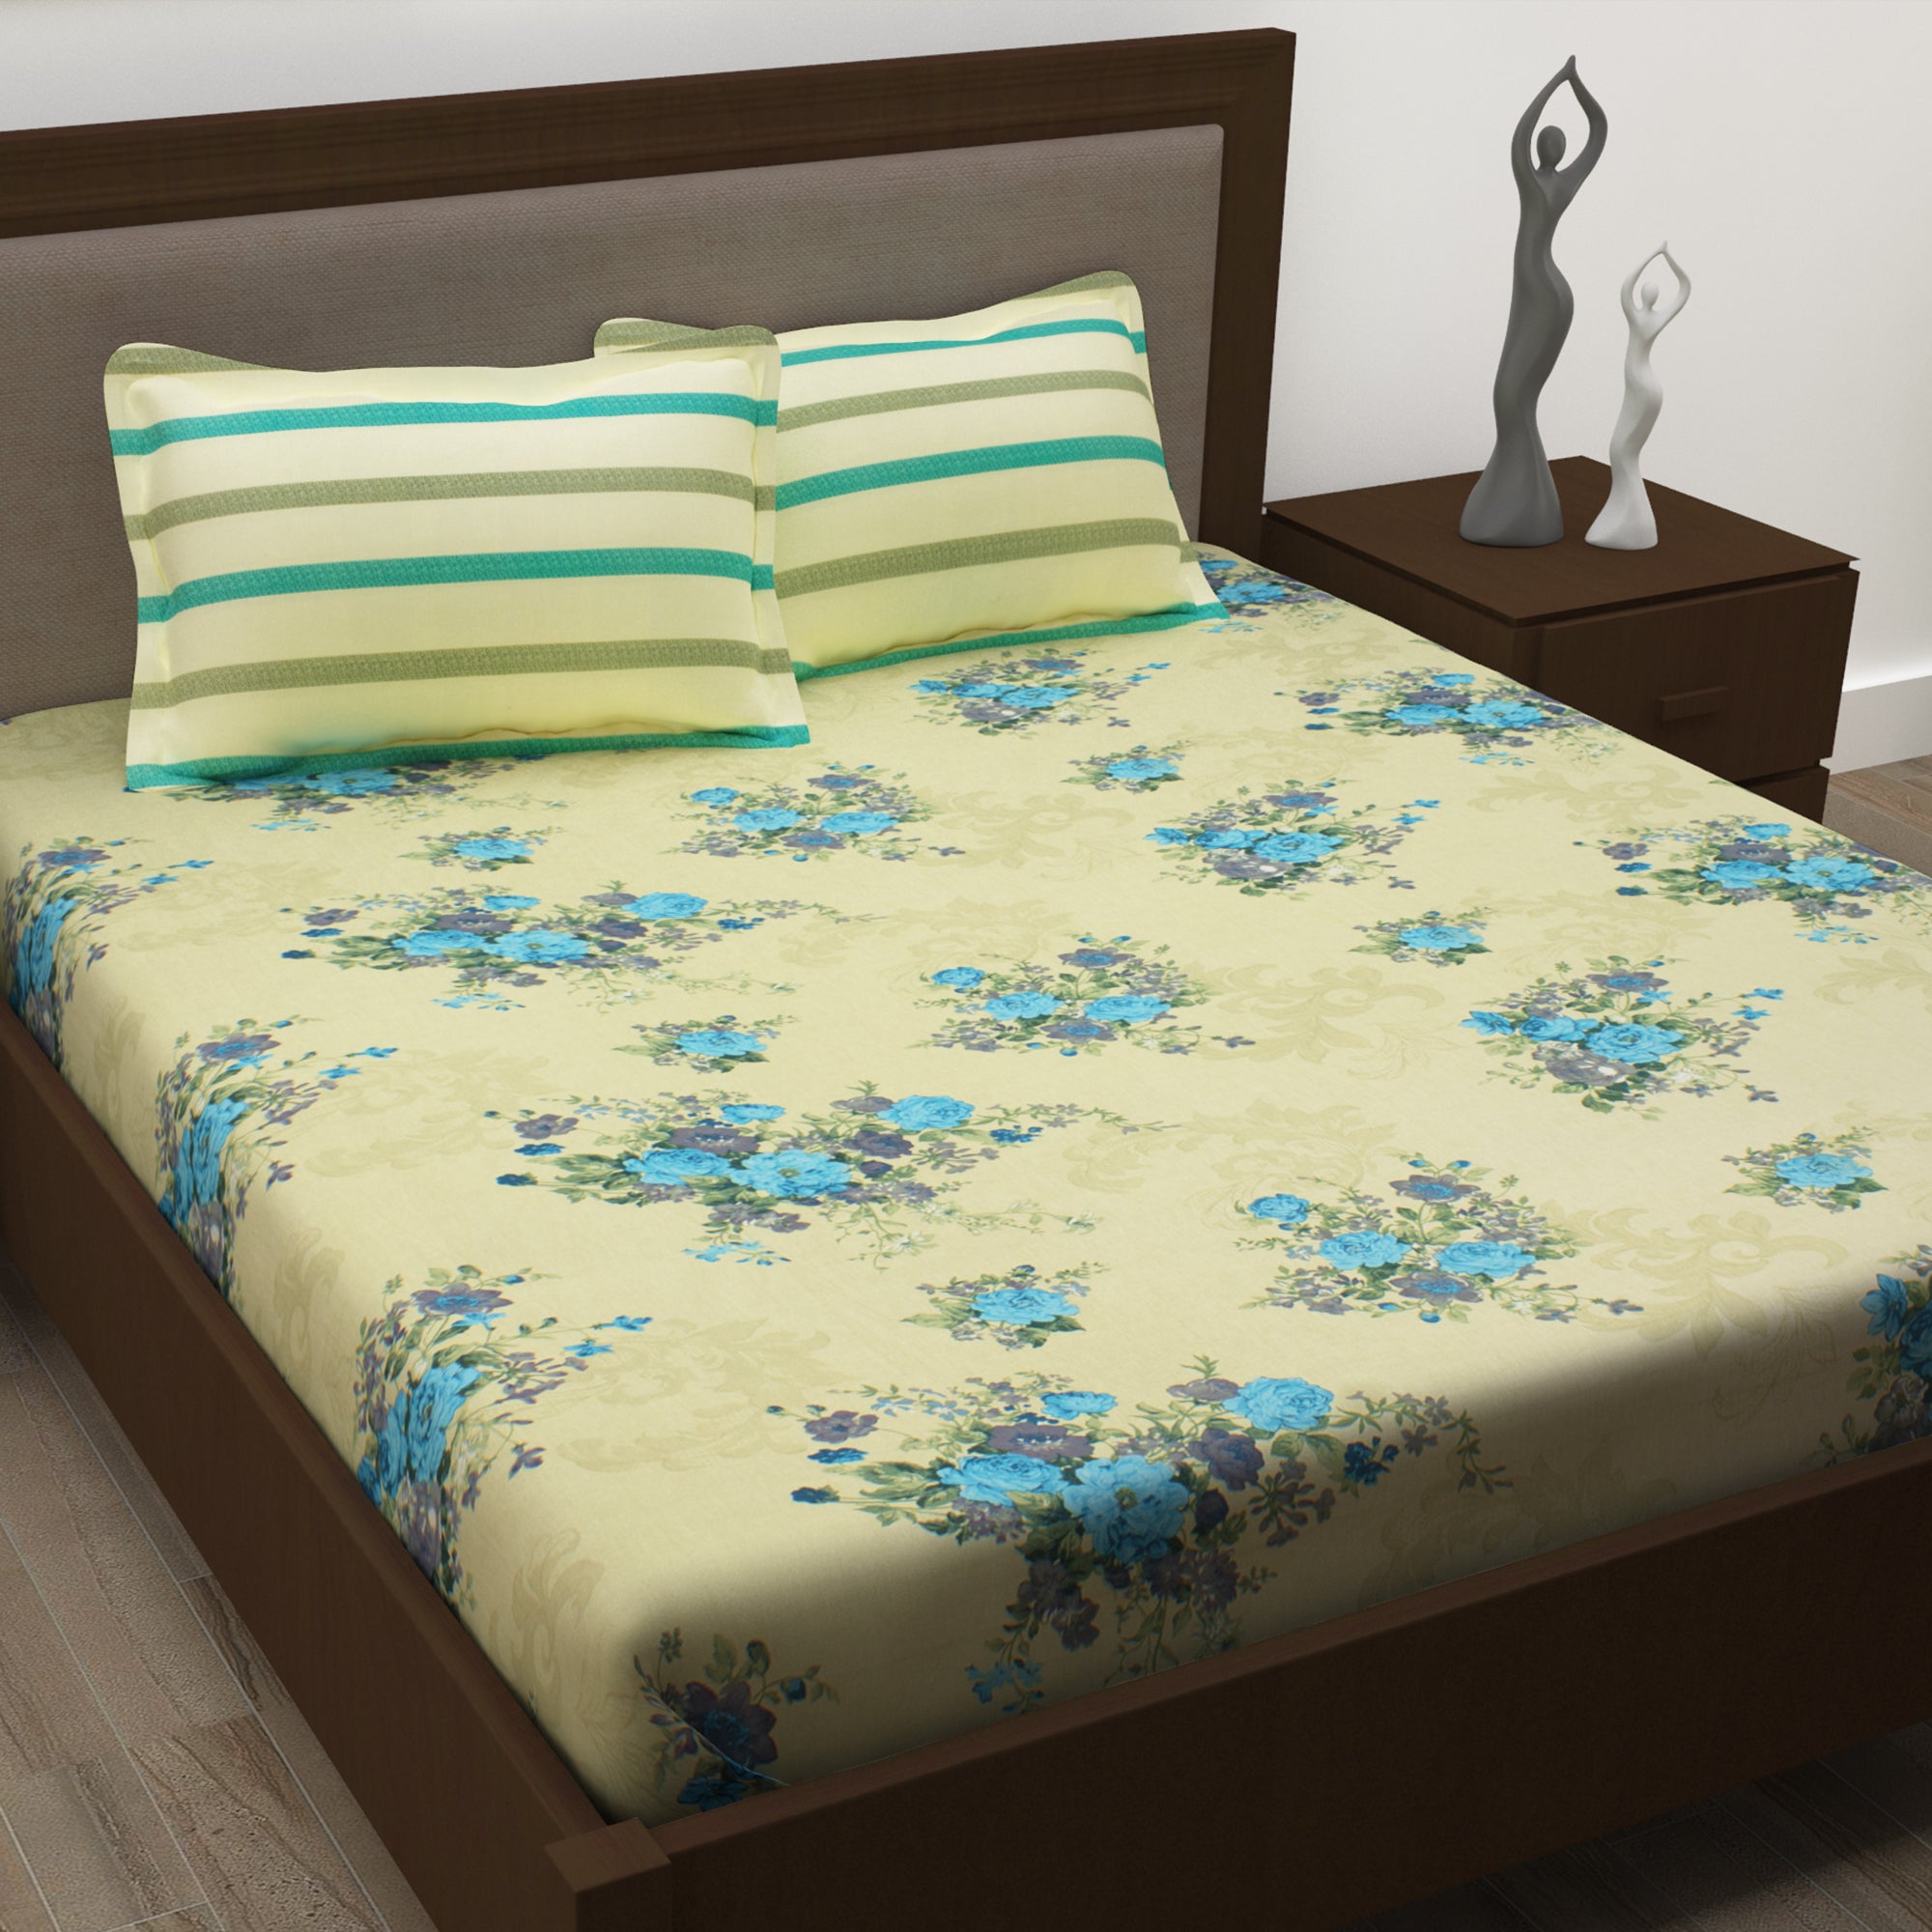 Metro 186 TC Cotton Cream Single Bedsheet with Pillow Covers